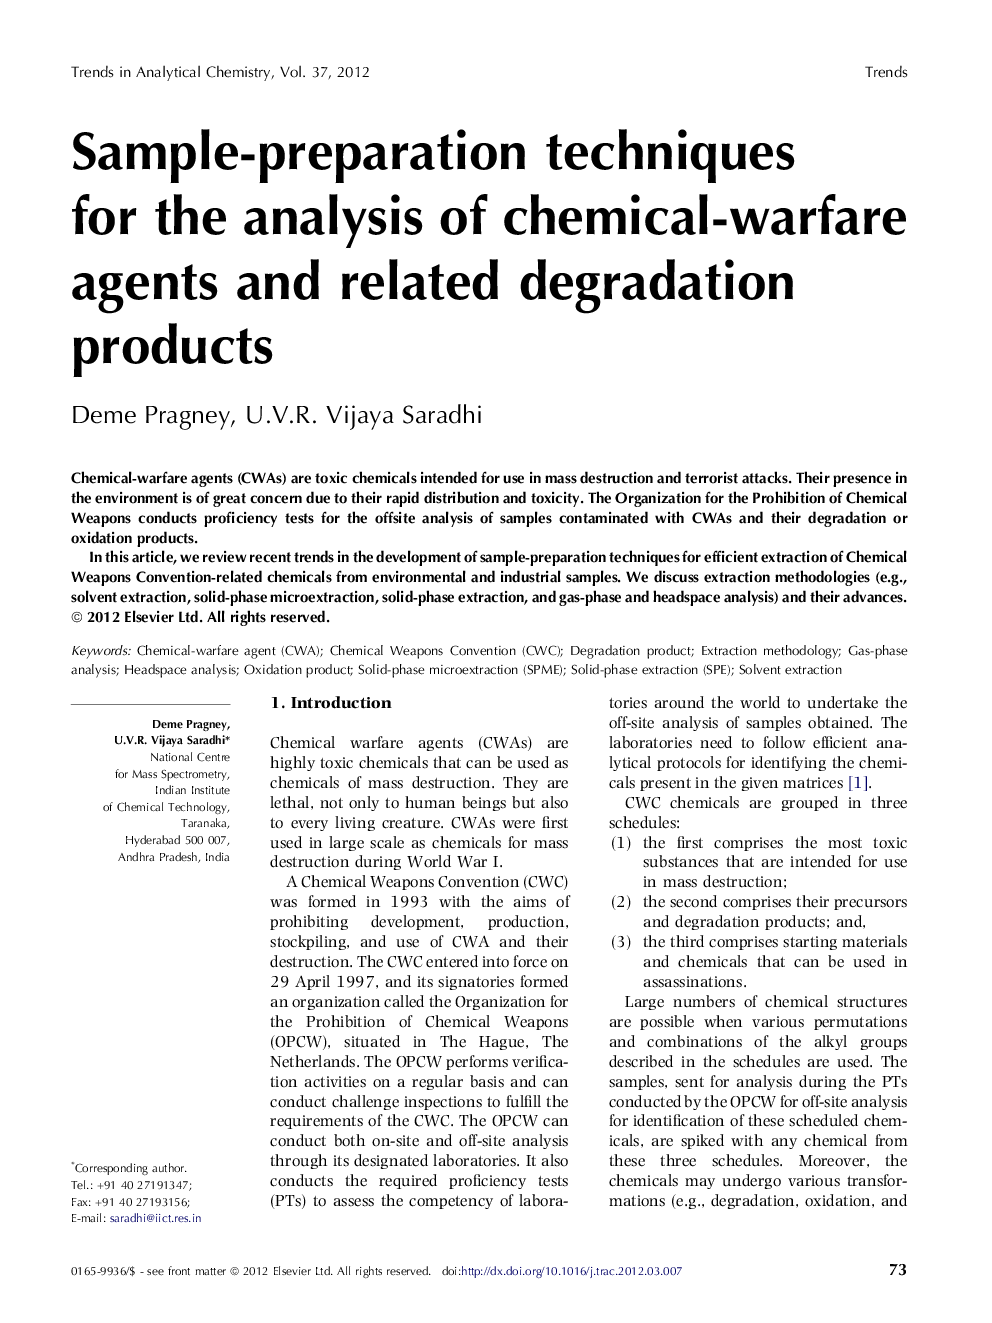 Sample-preparation techniques for the analysis of chemical-warfare agents and related degradation products